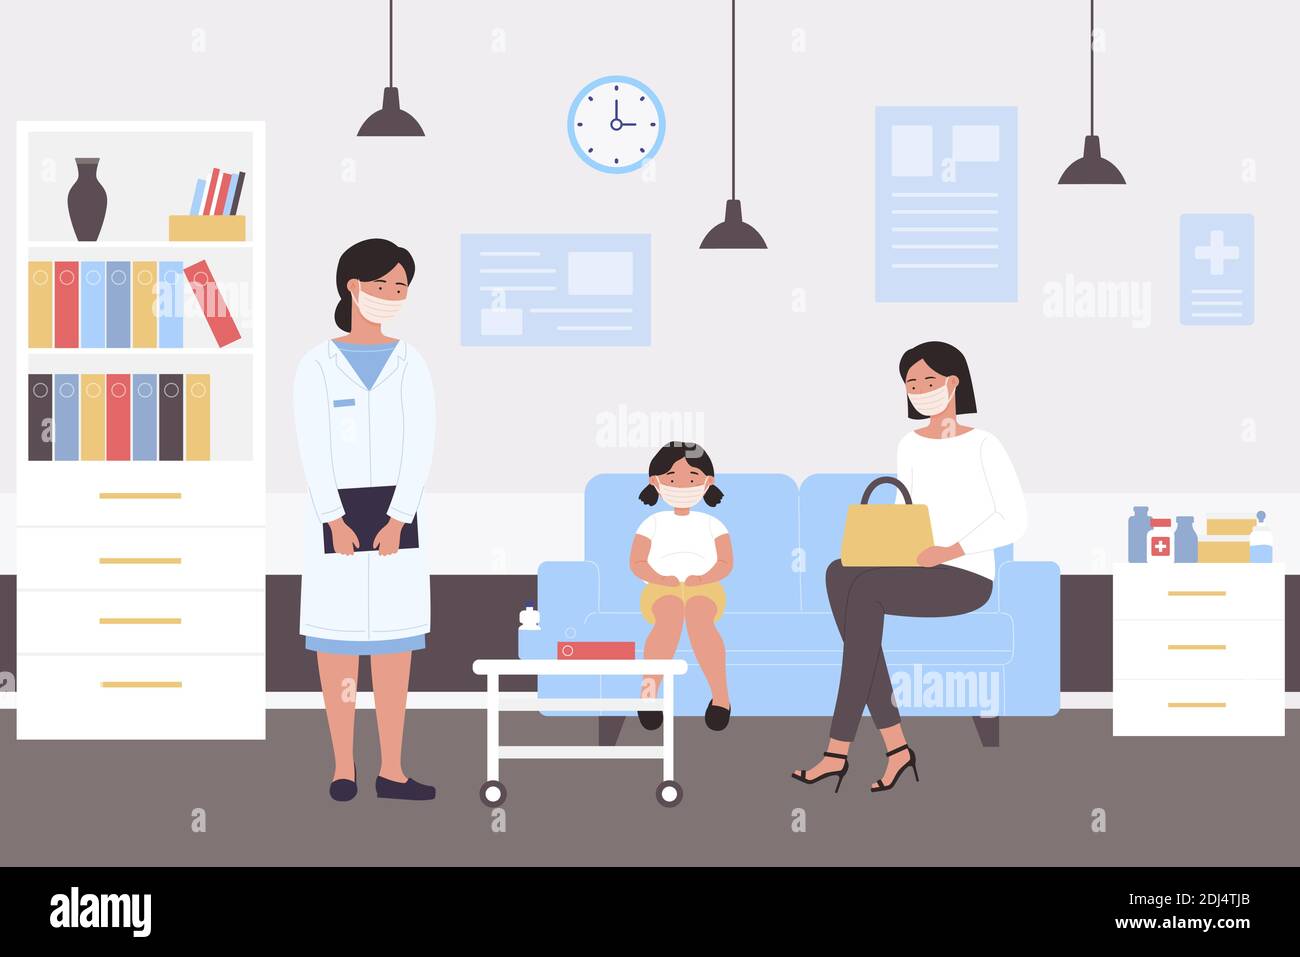 People wait pediatric medical checkup vector illustration. Cartoon mother with girl kid in face masks sitting on sofa in pediatrician doctor hospital room, waiting doc examining patient background Stock Vector